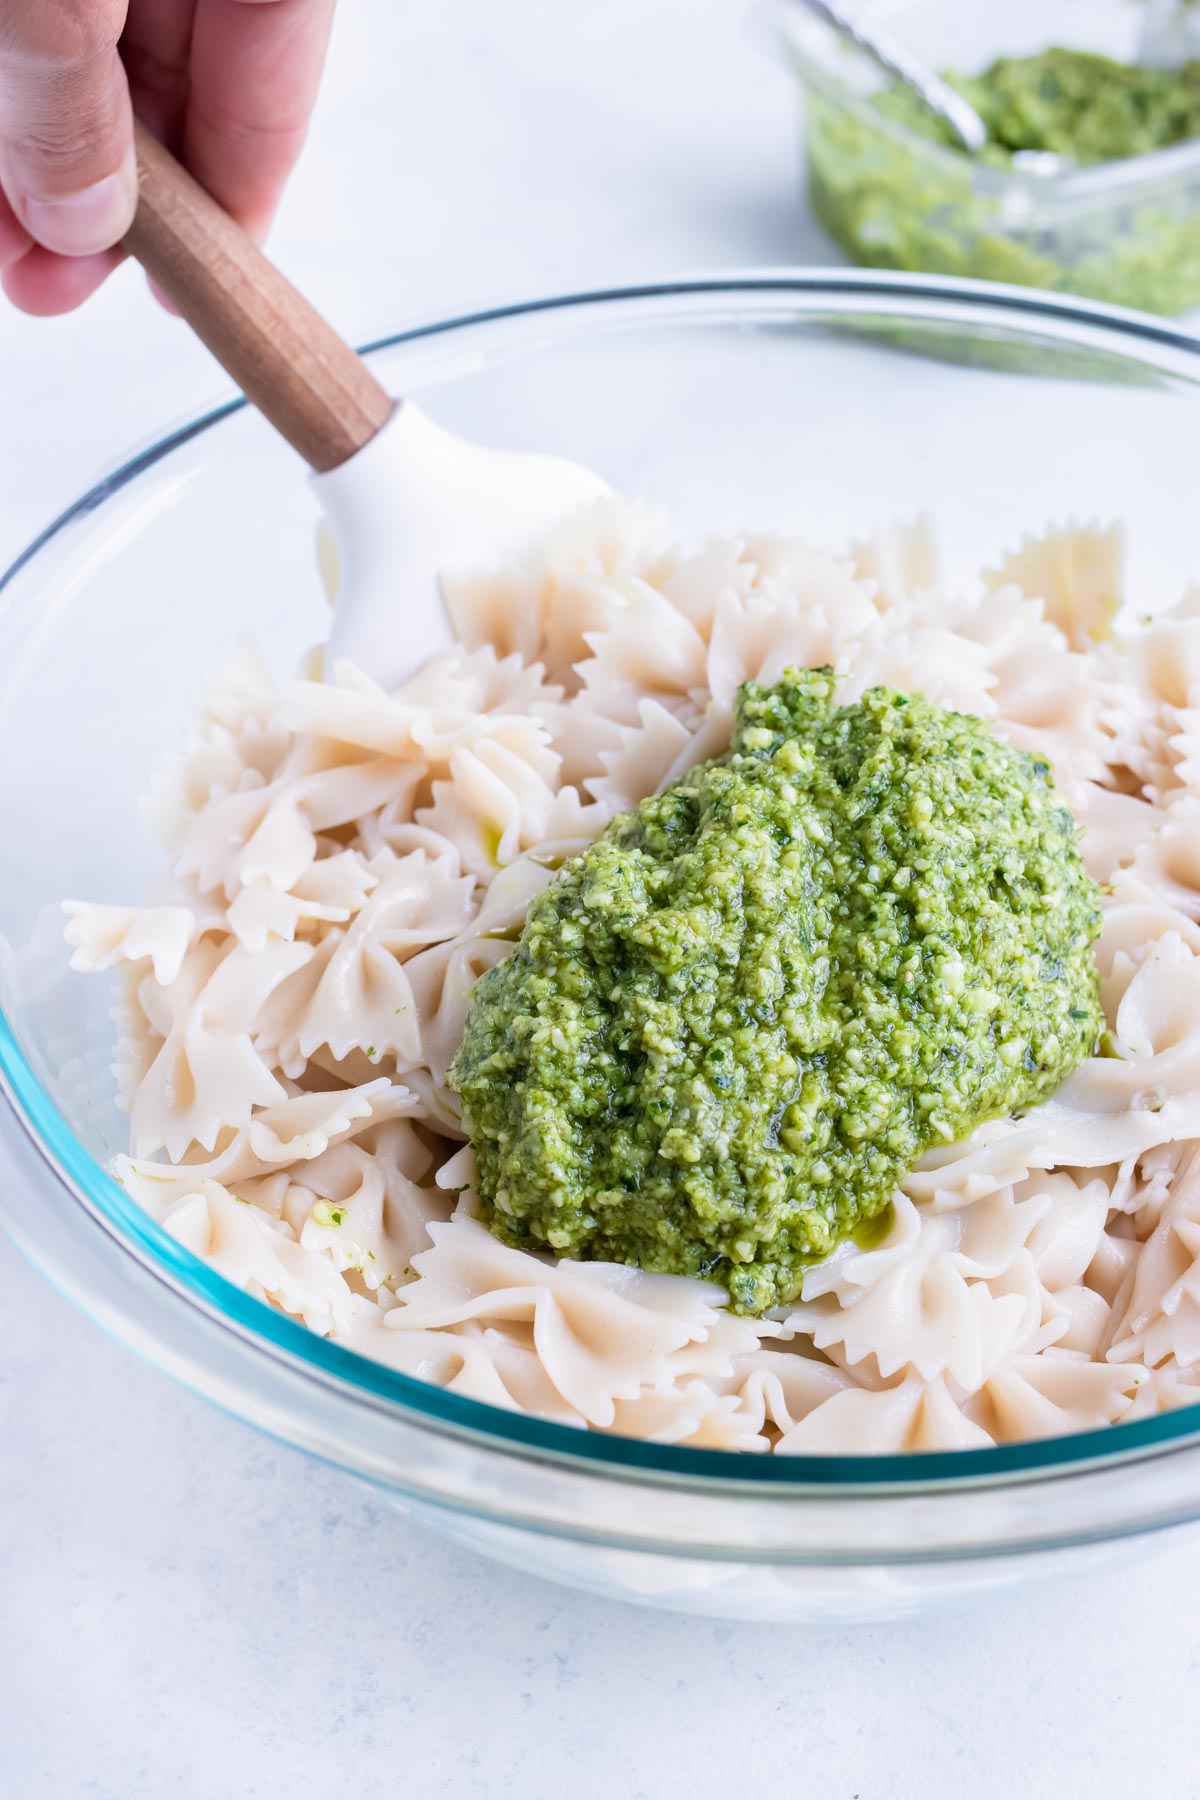 Basil pesto is added to a bowl of cooked pasta.